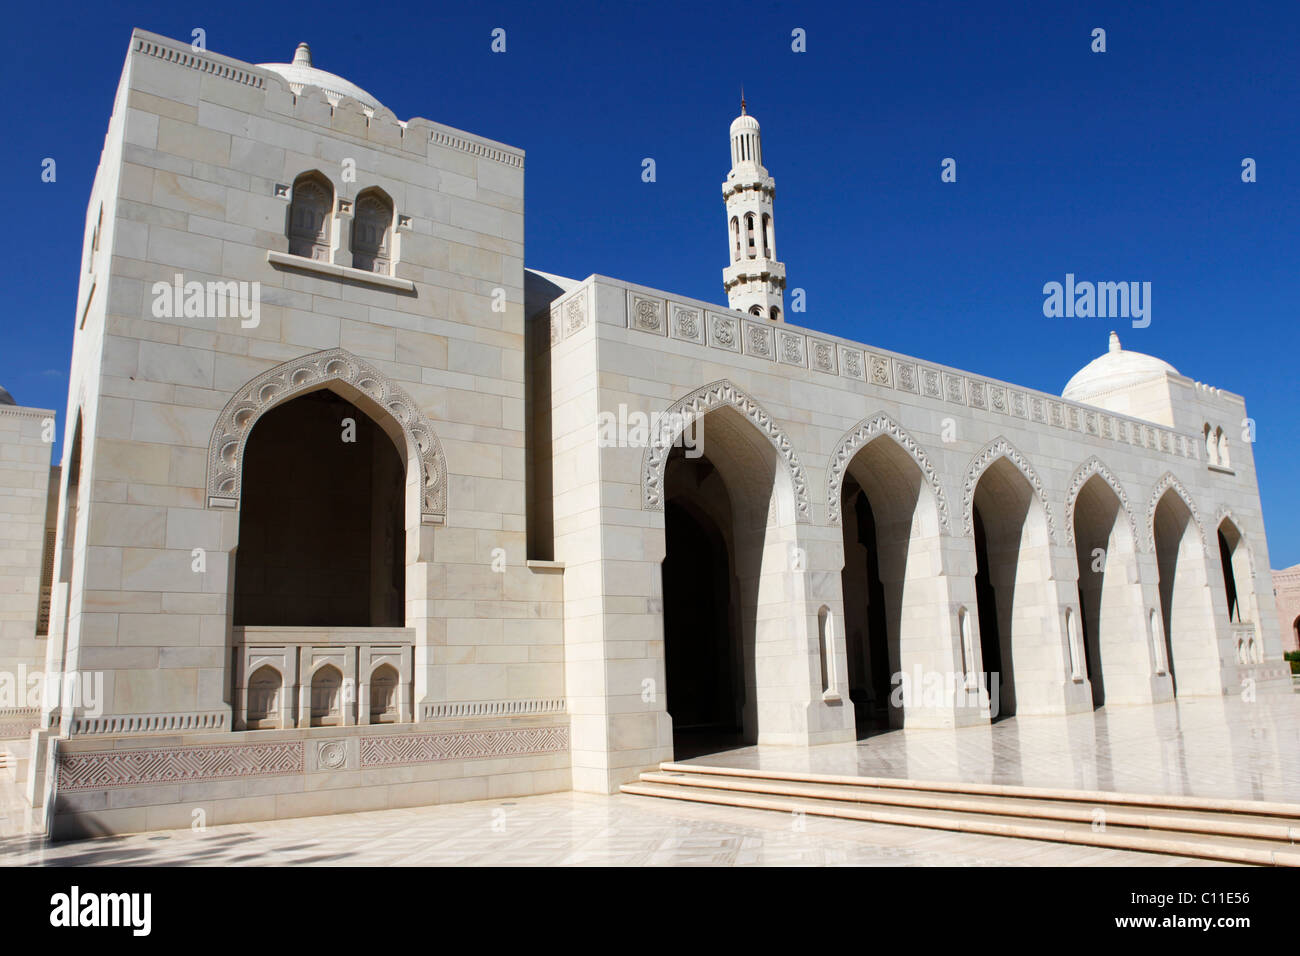 The Sultan Qaboos Grand Mosque in Muscat, Oman. Stock Photo